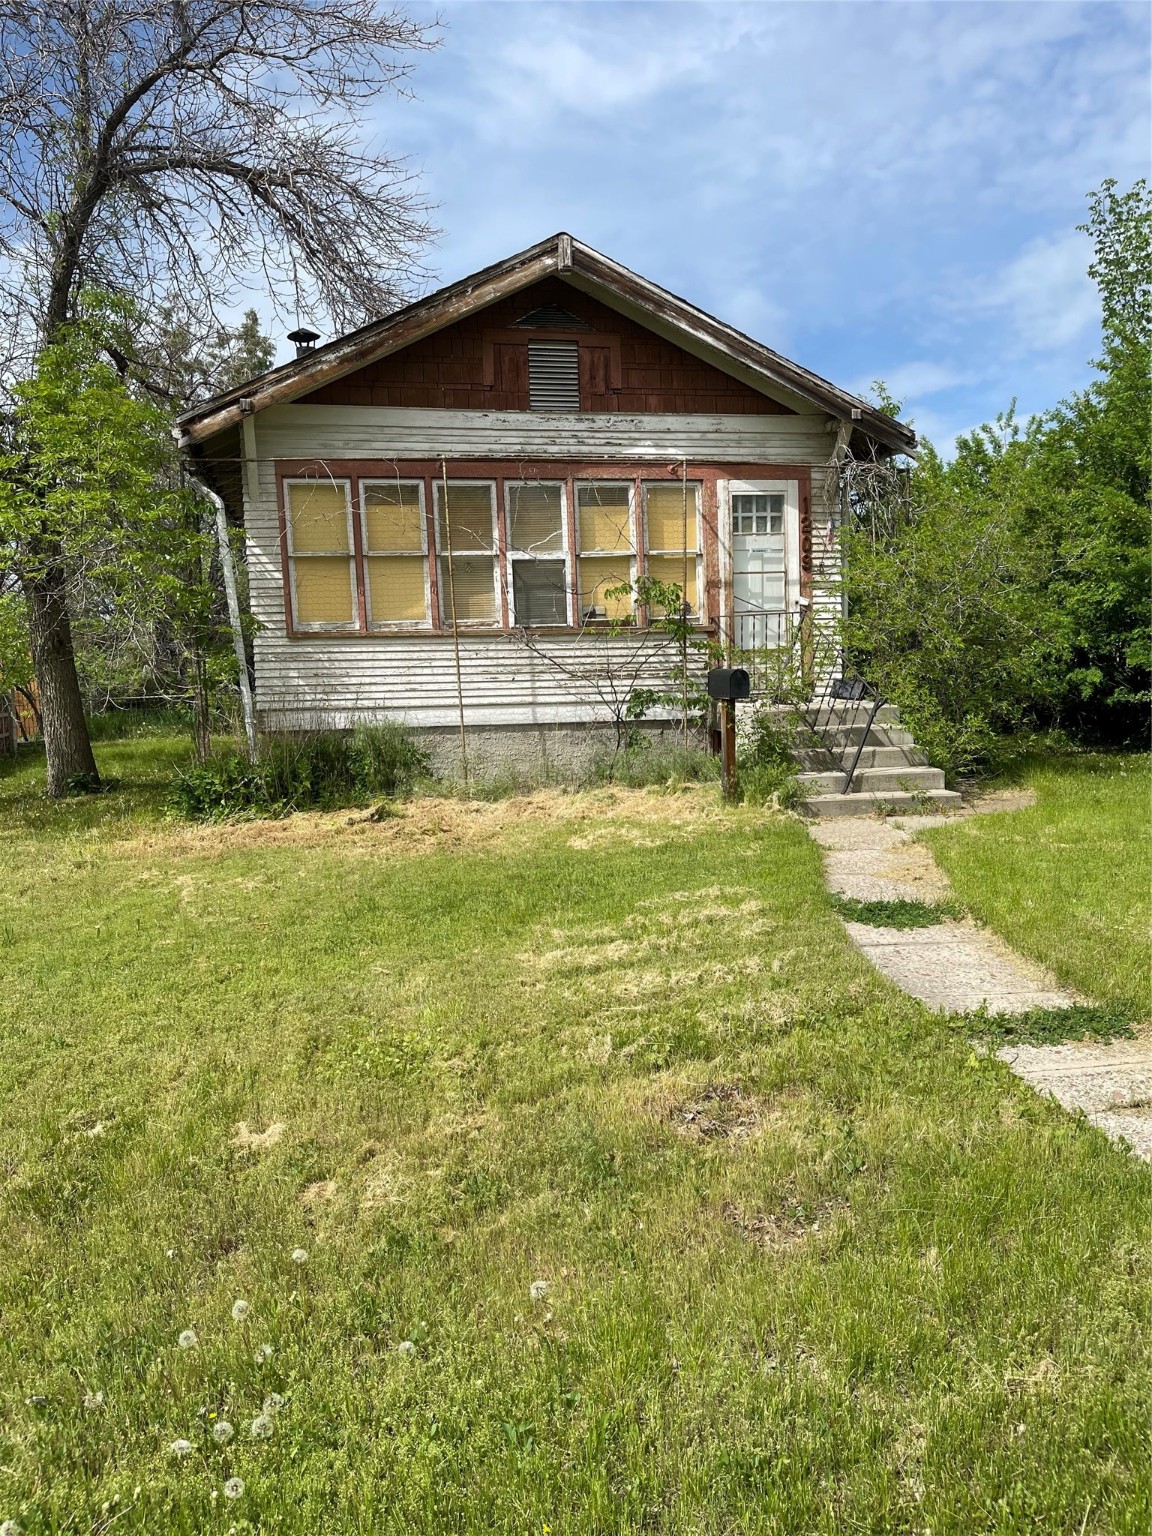 FANTASTIC FIXER - GREAT OPPORTUNITY for someone who wants to ADD SOME LOVE to this home! Featuring 3 beds/1 bath, partially fenced yard and a 2-car detached garage.

Yes it is sad when a charmer like this one loses its luster, but it is time to REVIVE IT! 

Listed by Melissa Dascoulias.